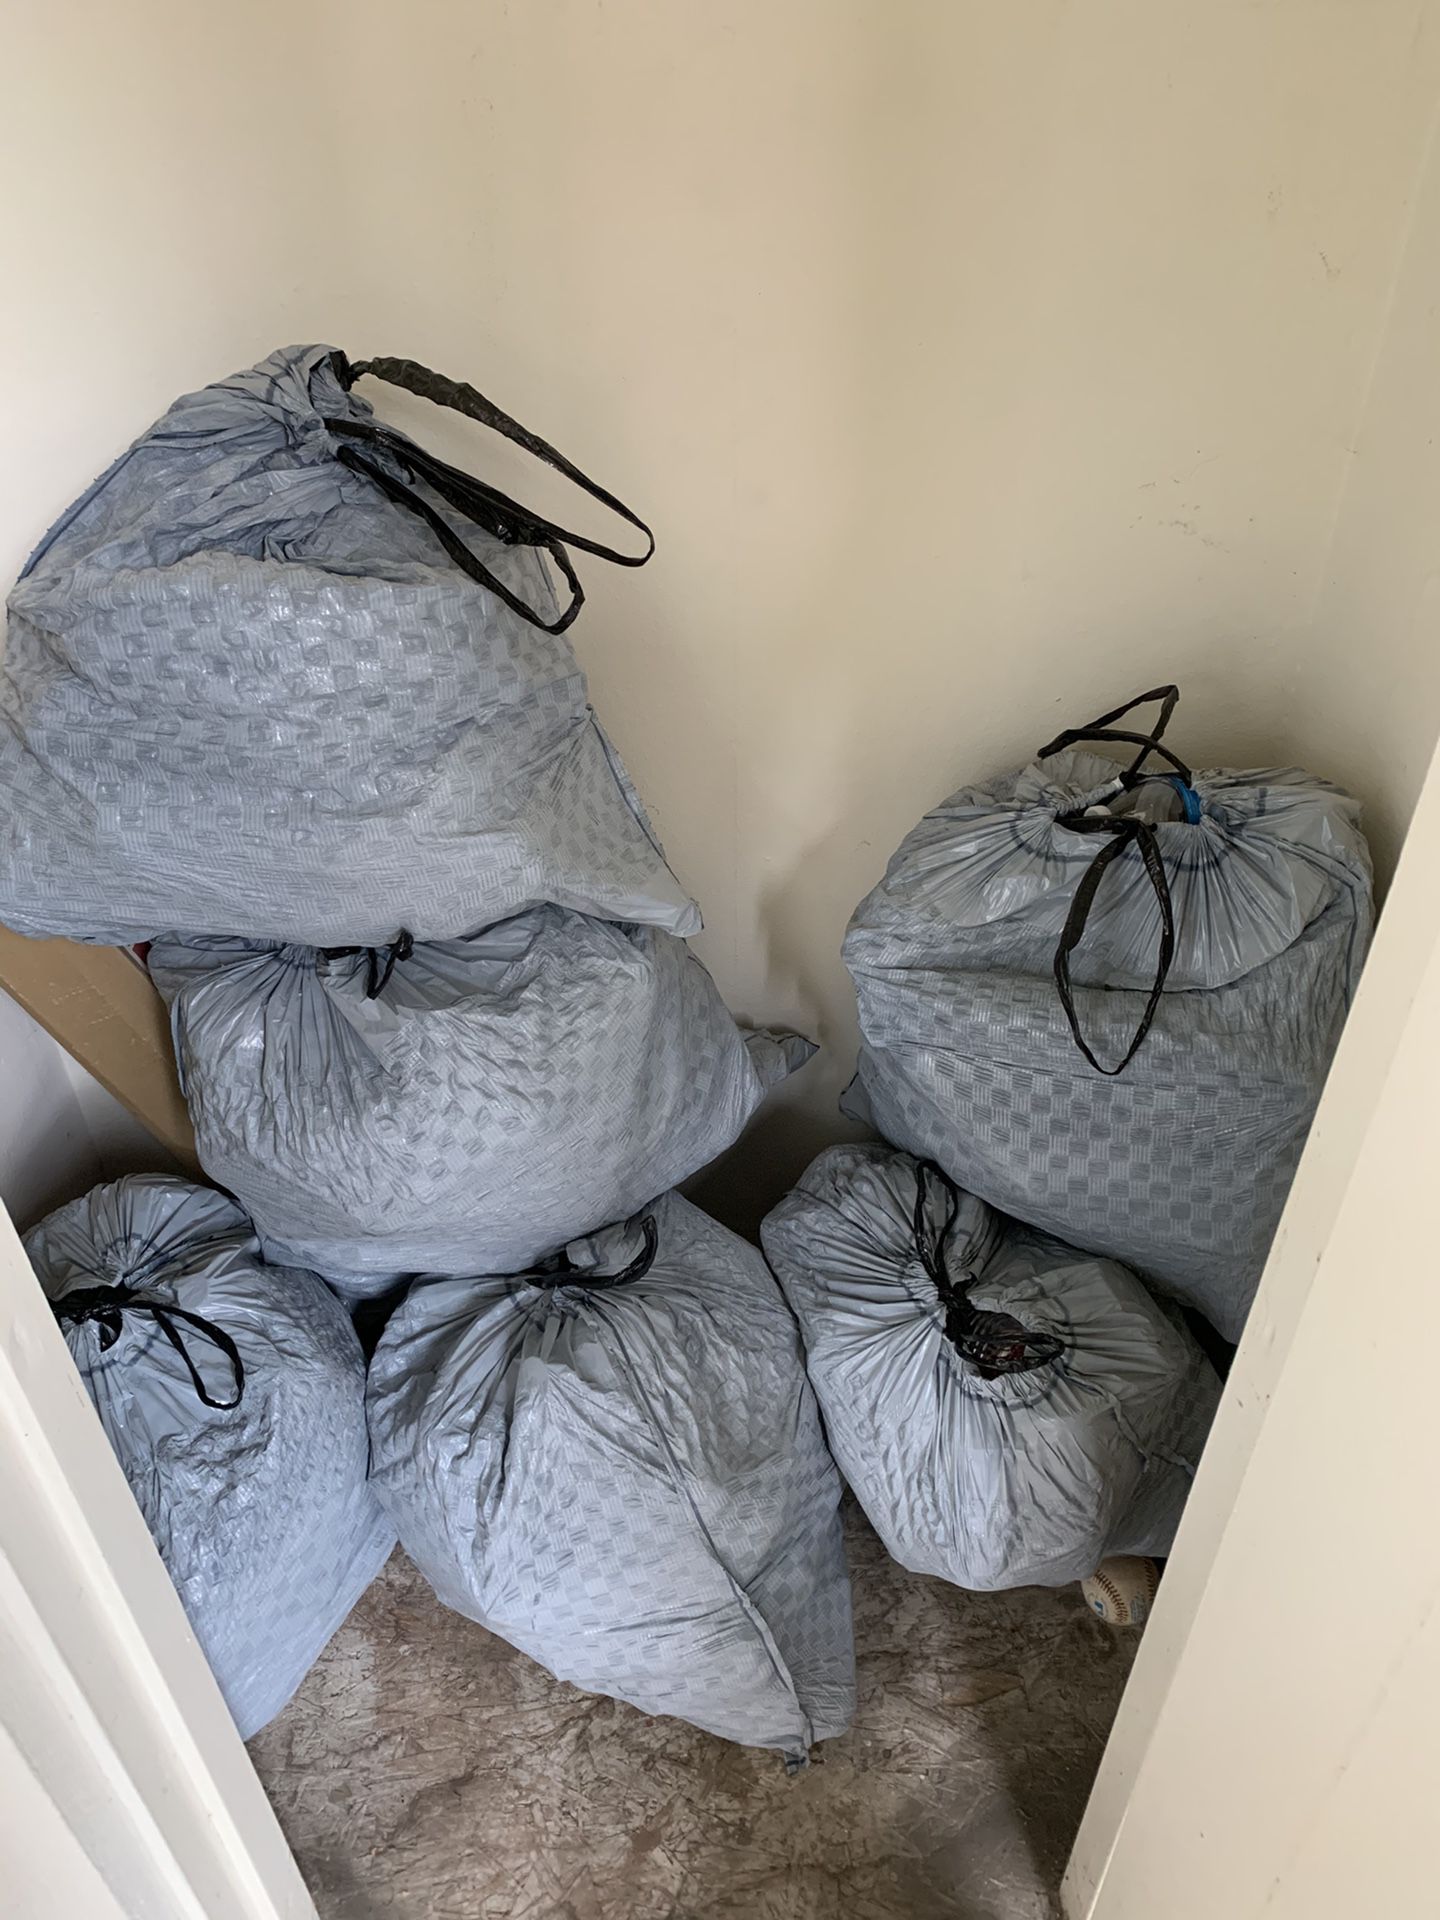 FREE 6 bags of recycles (plastic bottles, cans, and glass bottles)